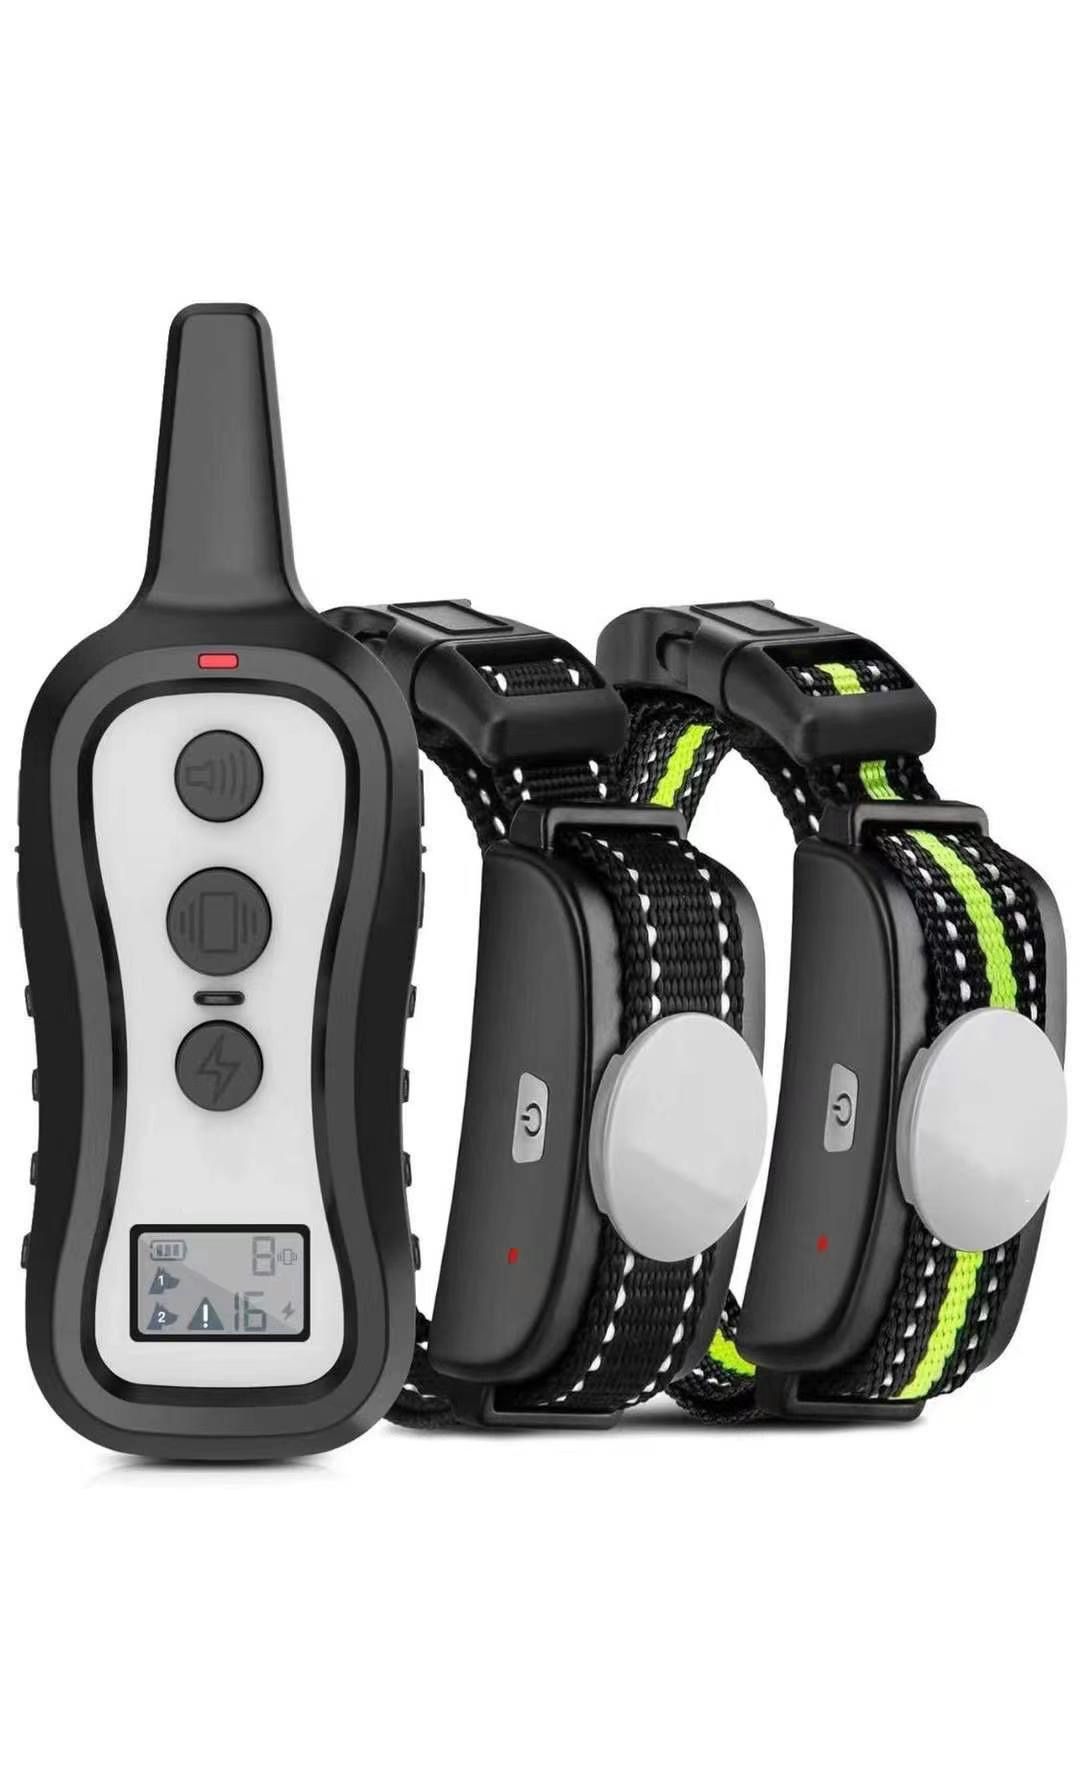 Dog Training Collar with 2 Receivers, Shock Collars for Dogs with Remote, Dog Shock Collar with Beep Vibration Shock for Small Medium Large 2 Dogs